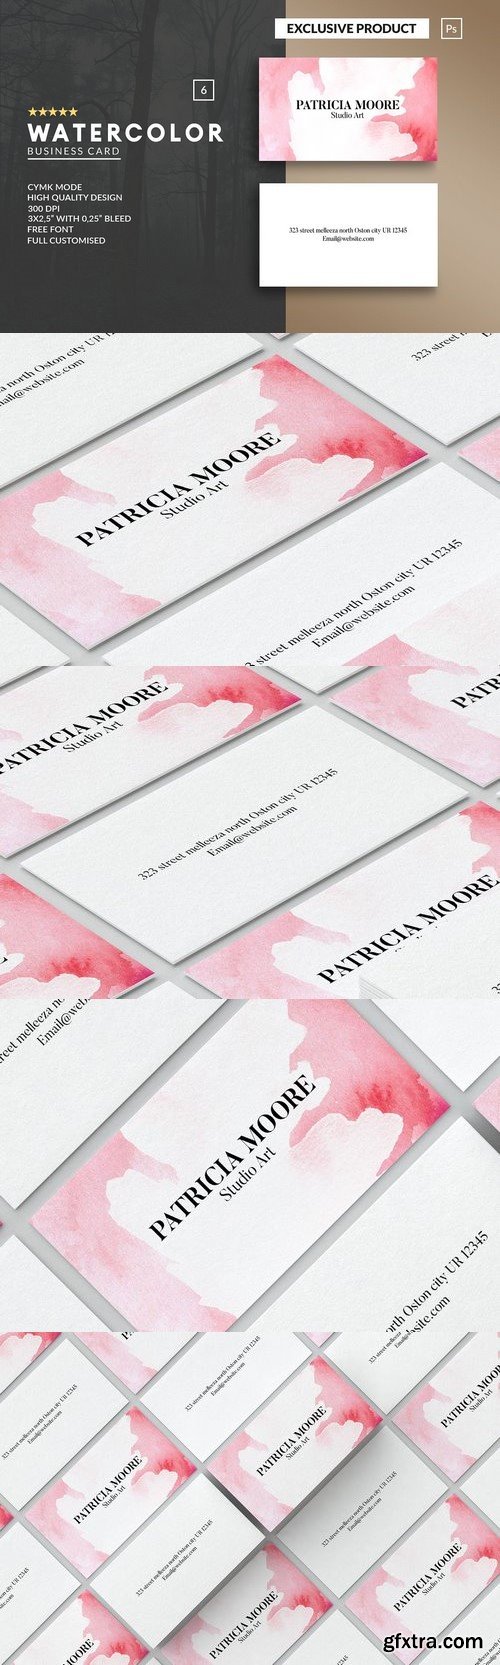 CM - Watercolor Business Card Template 1367488